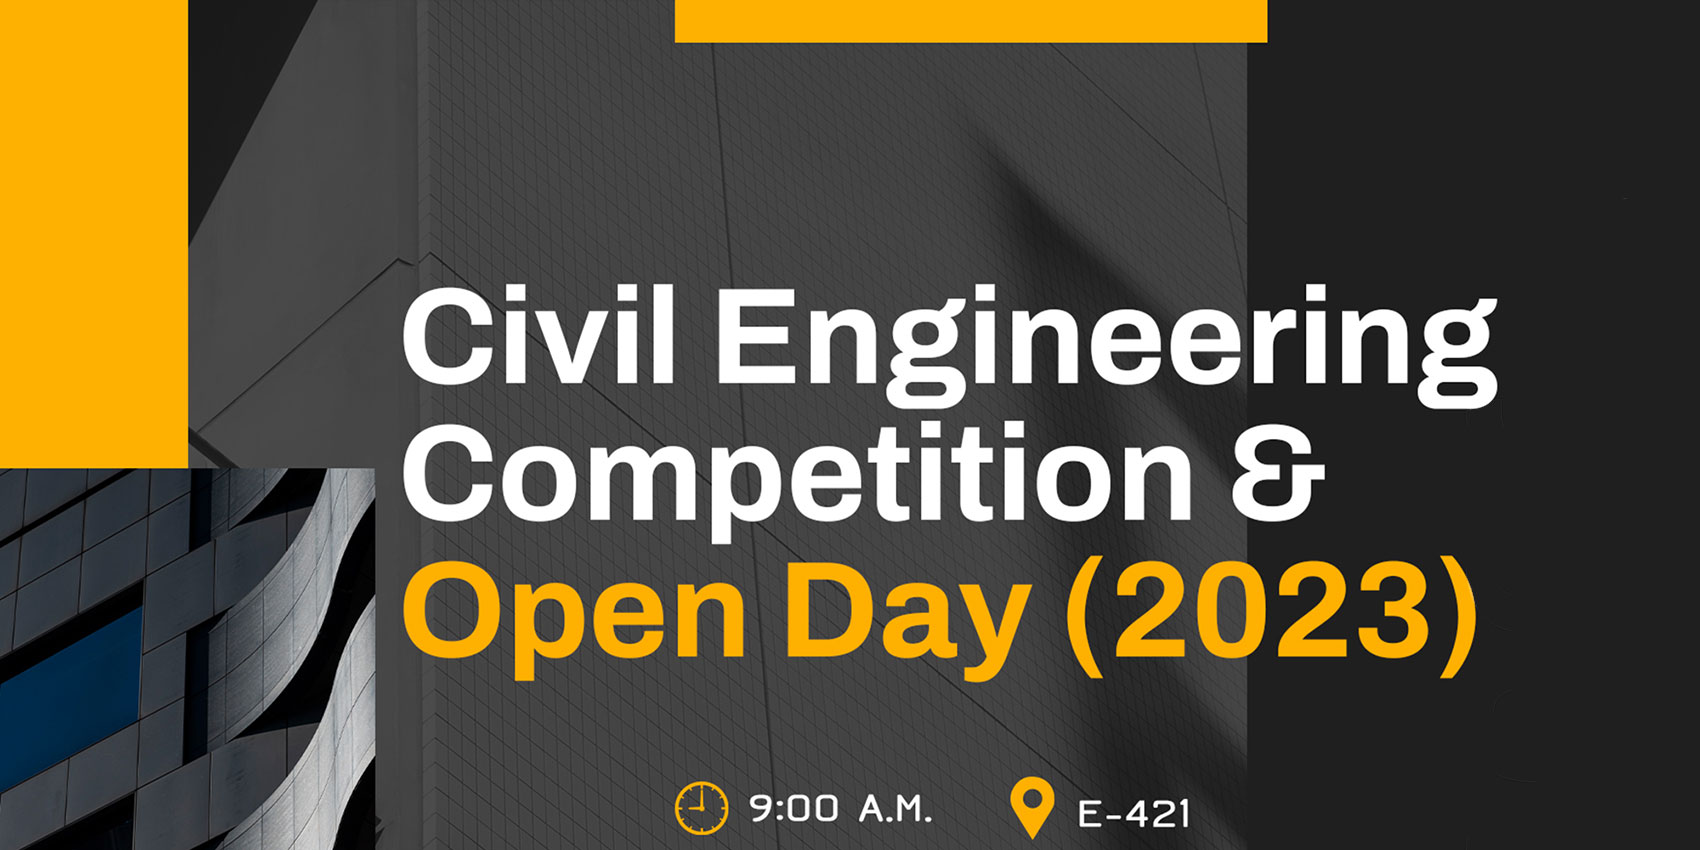 Civil Engineering Competition and Open Day 2023